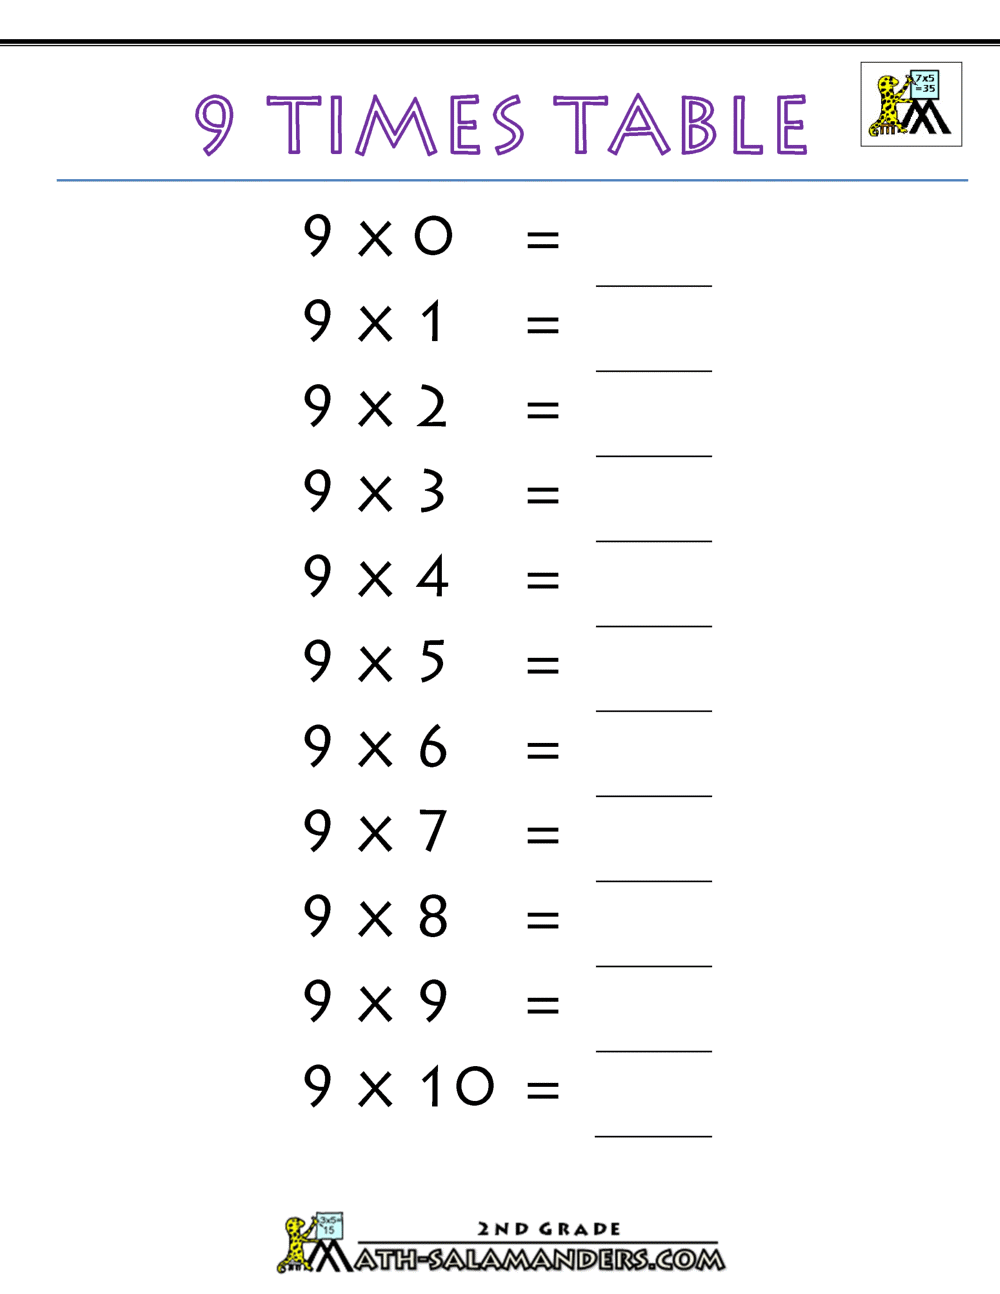  9 Times Tables Practice Test Brokeasshome